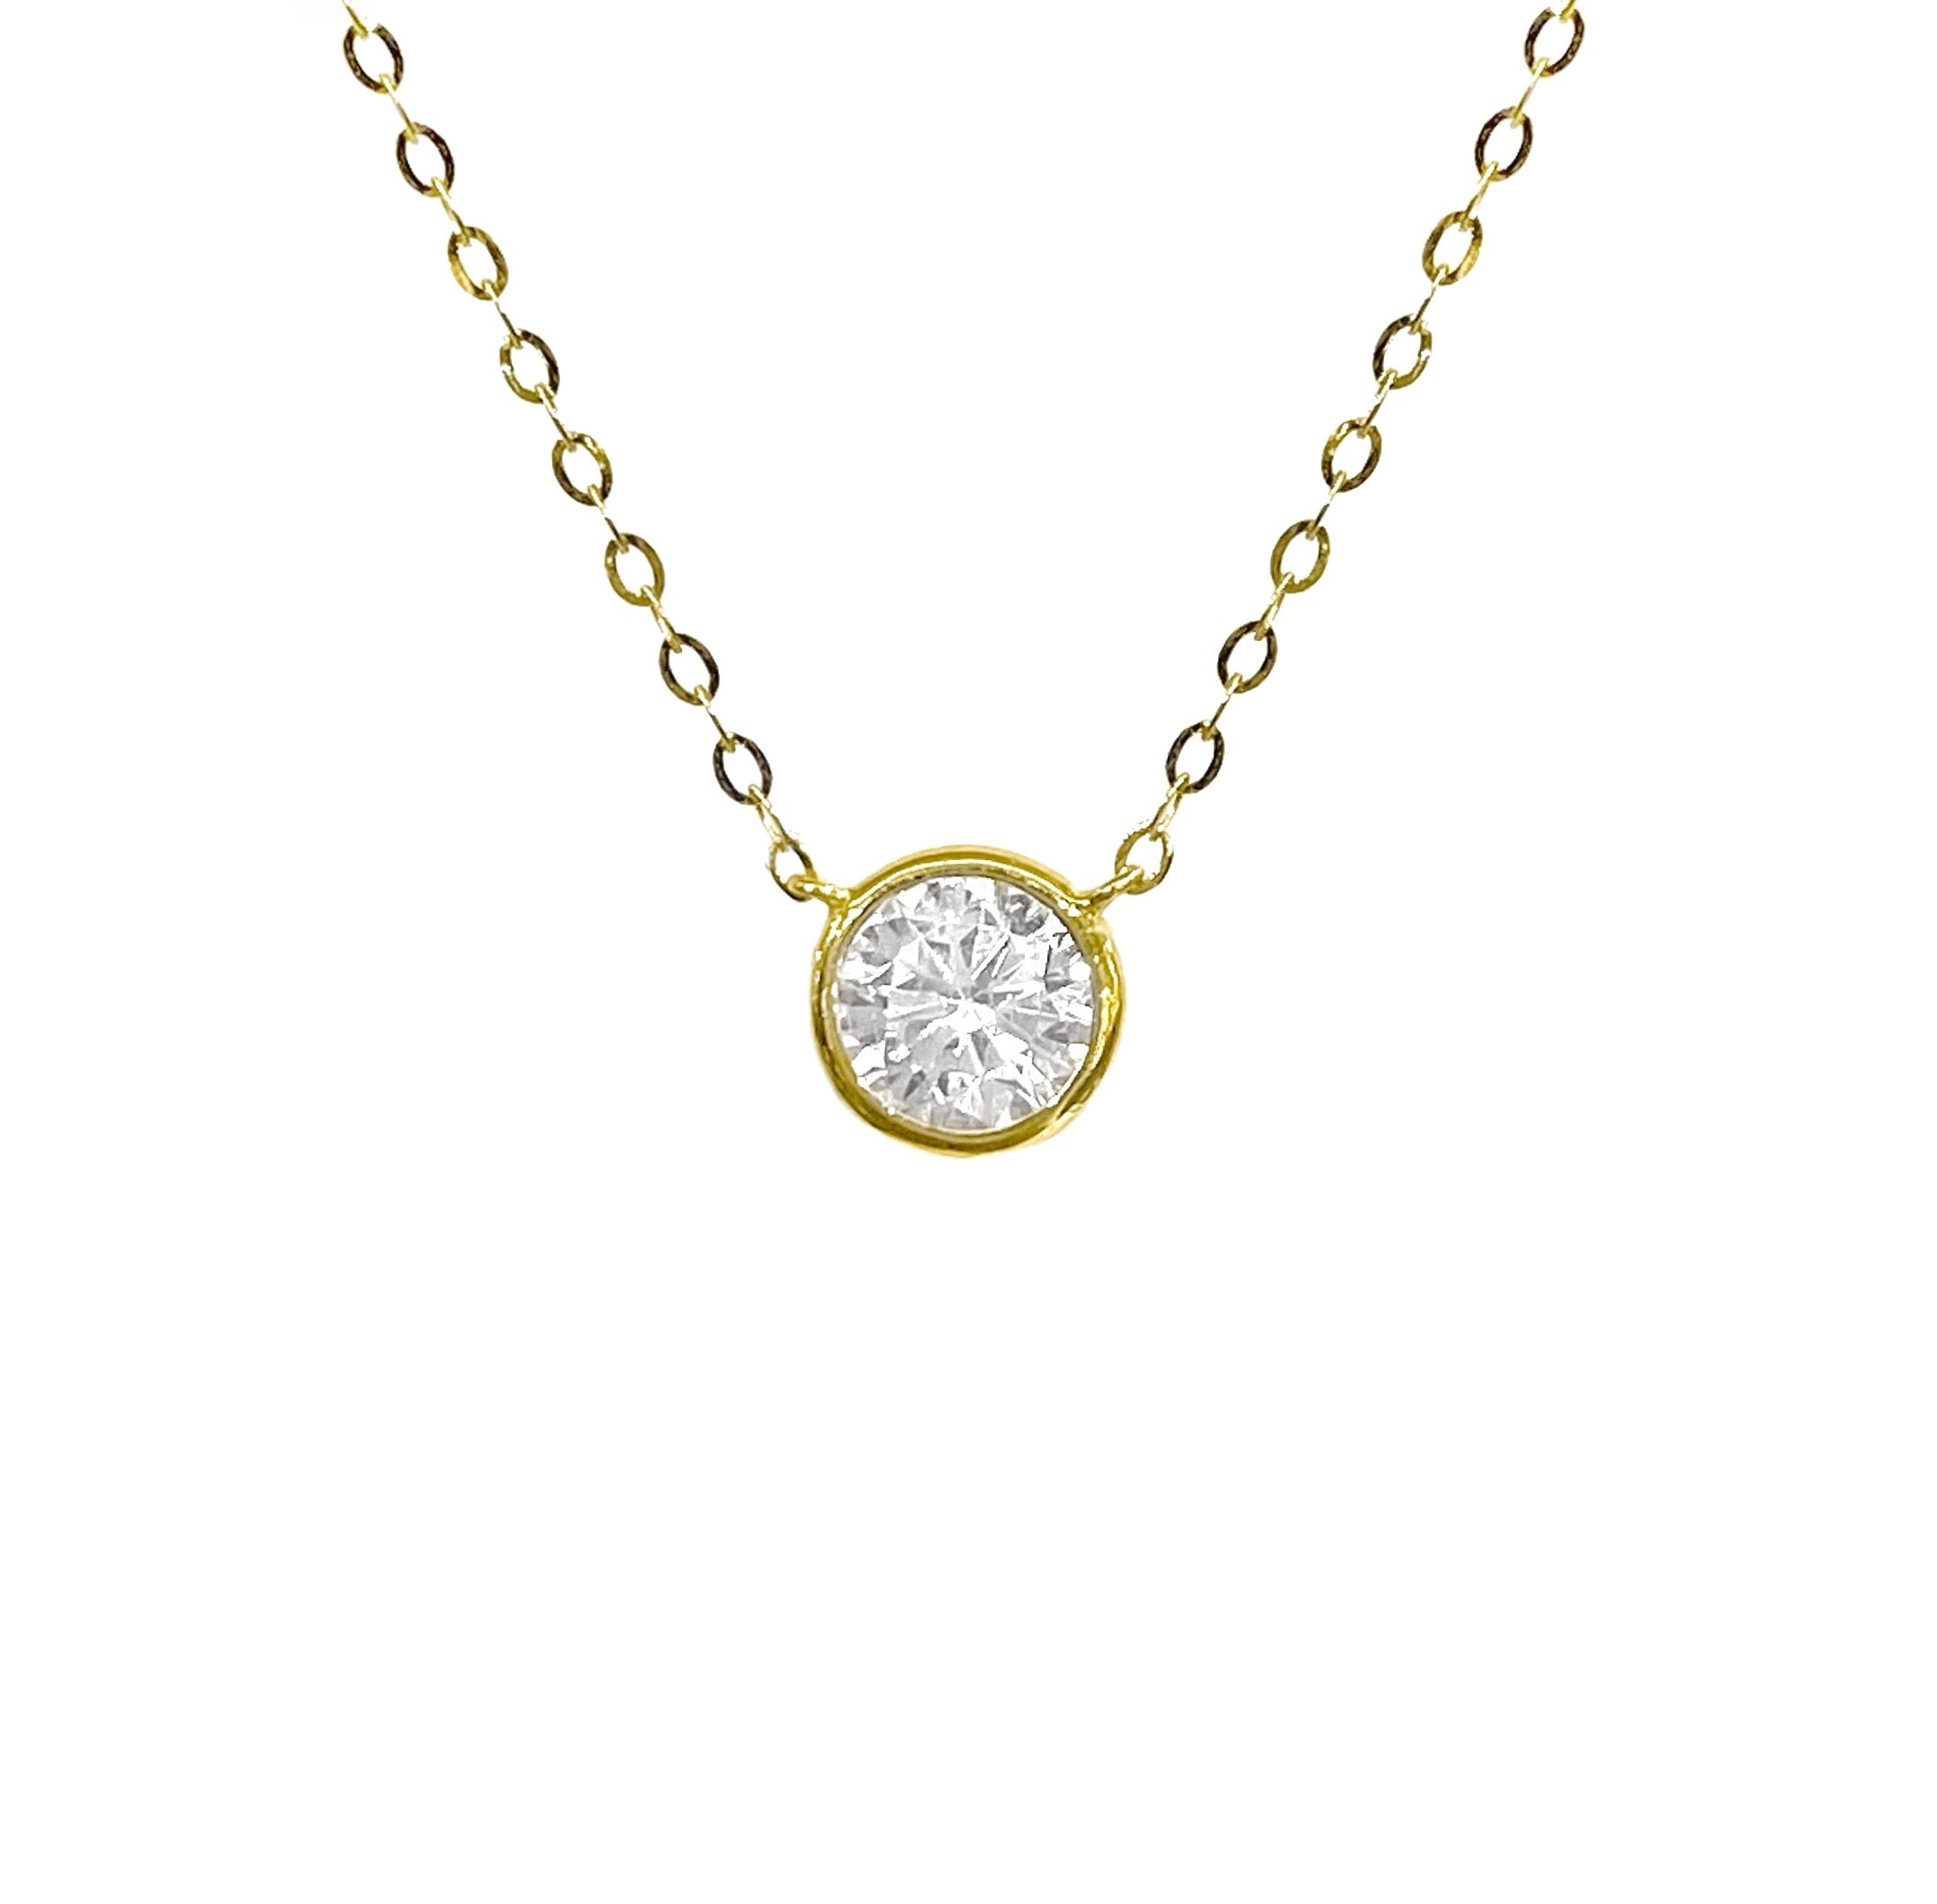 14K YELLOW GOLD FLOATING BEZEL CRYSTAL NECKLACE